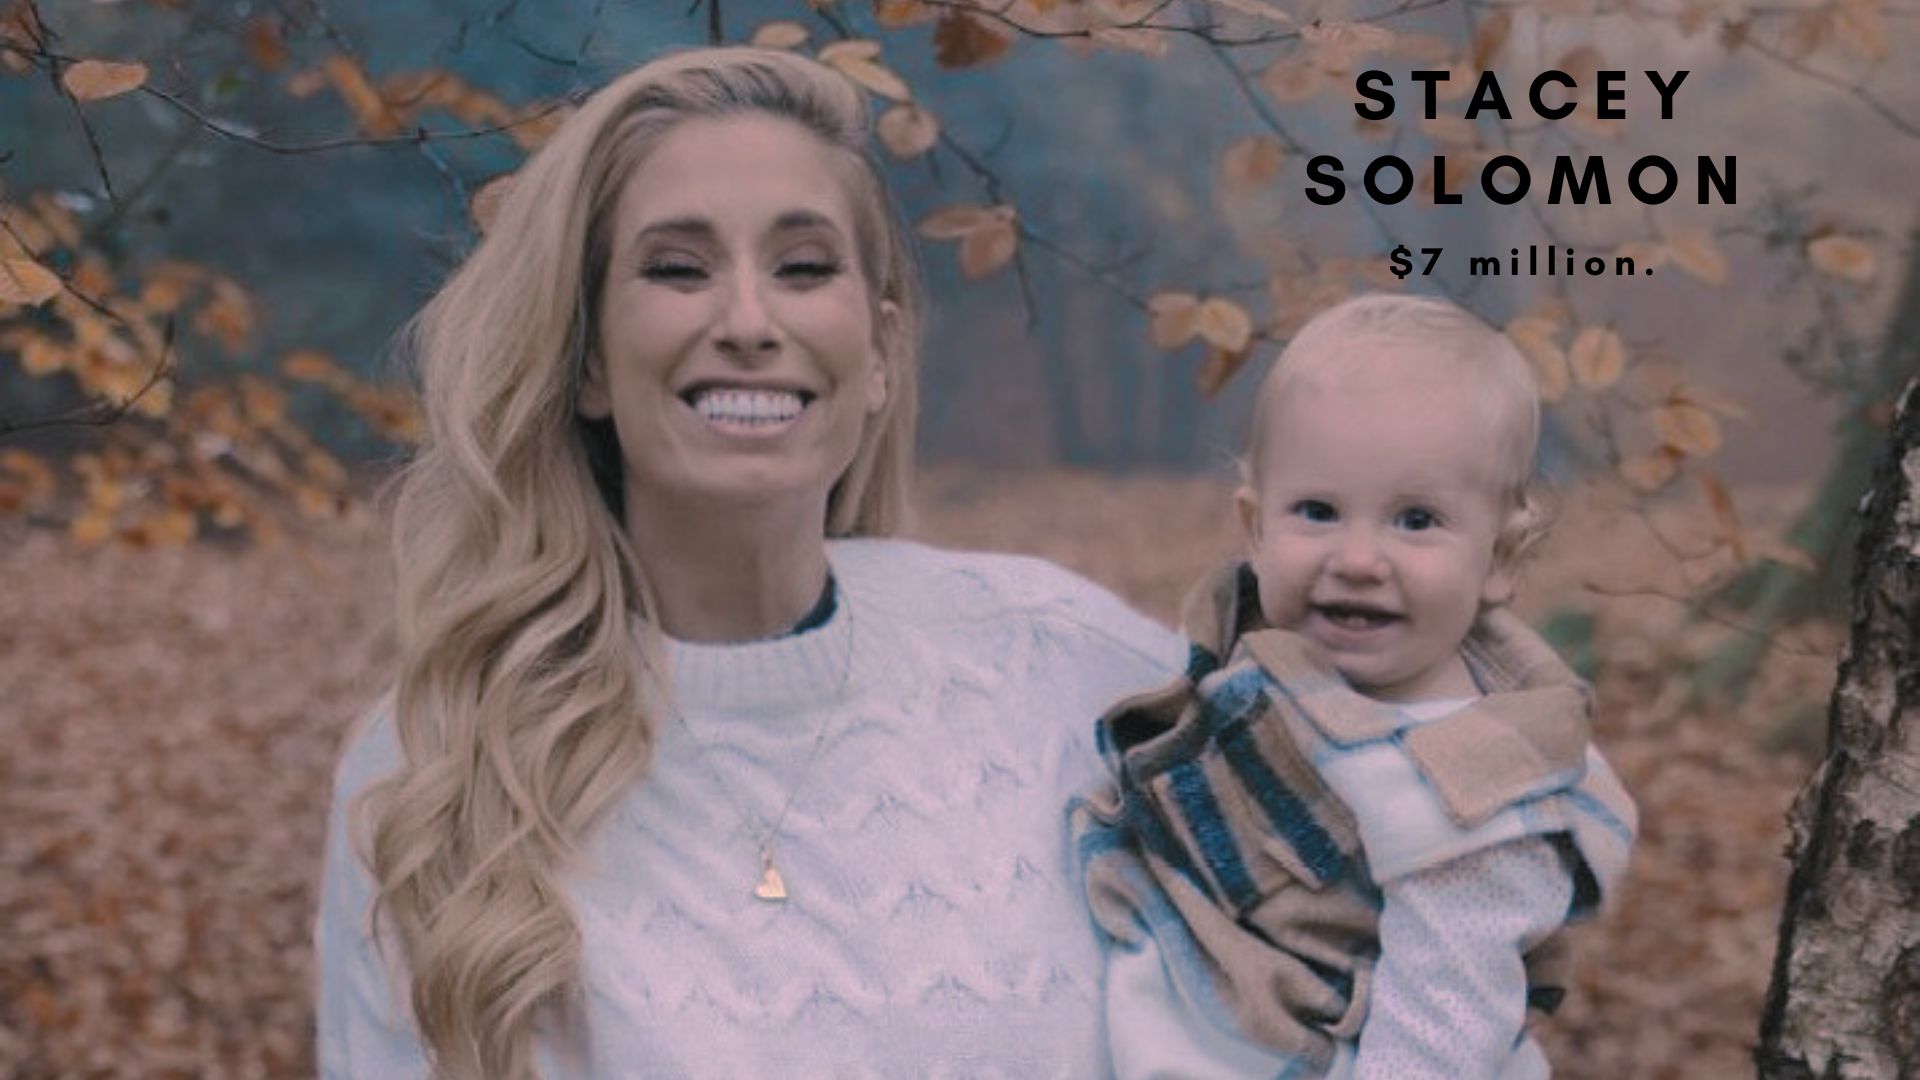 Stacey solomon net worth, salary, and more.